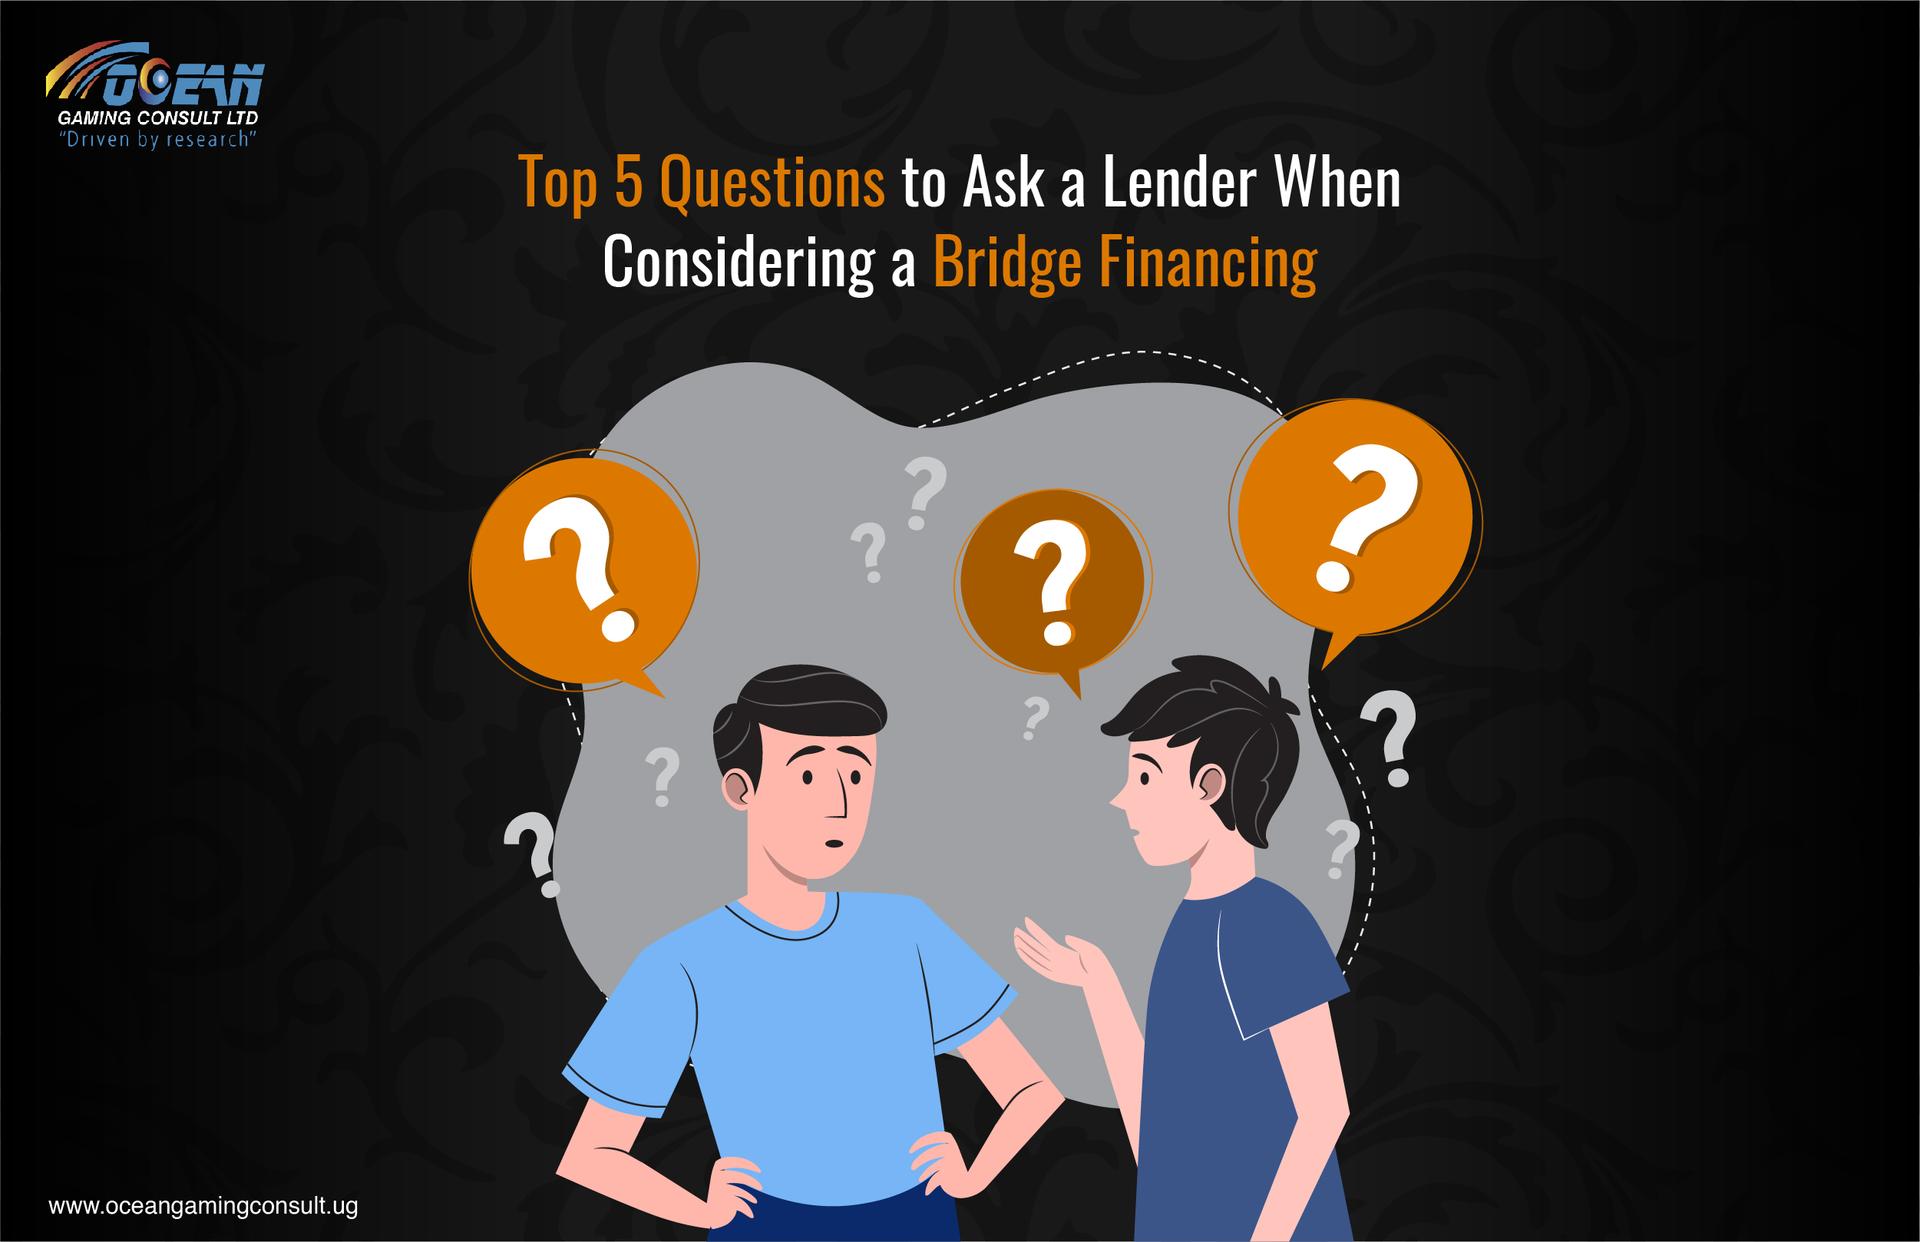 Top 5 Questions to Ask a Lender When Considering a Bridge Financing